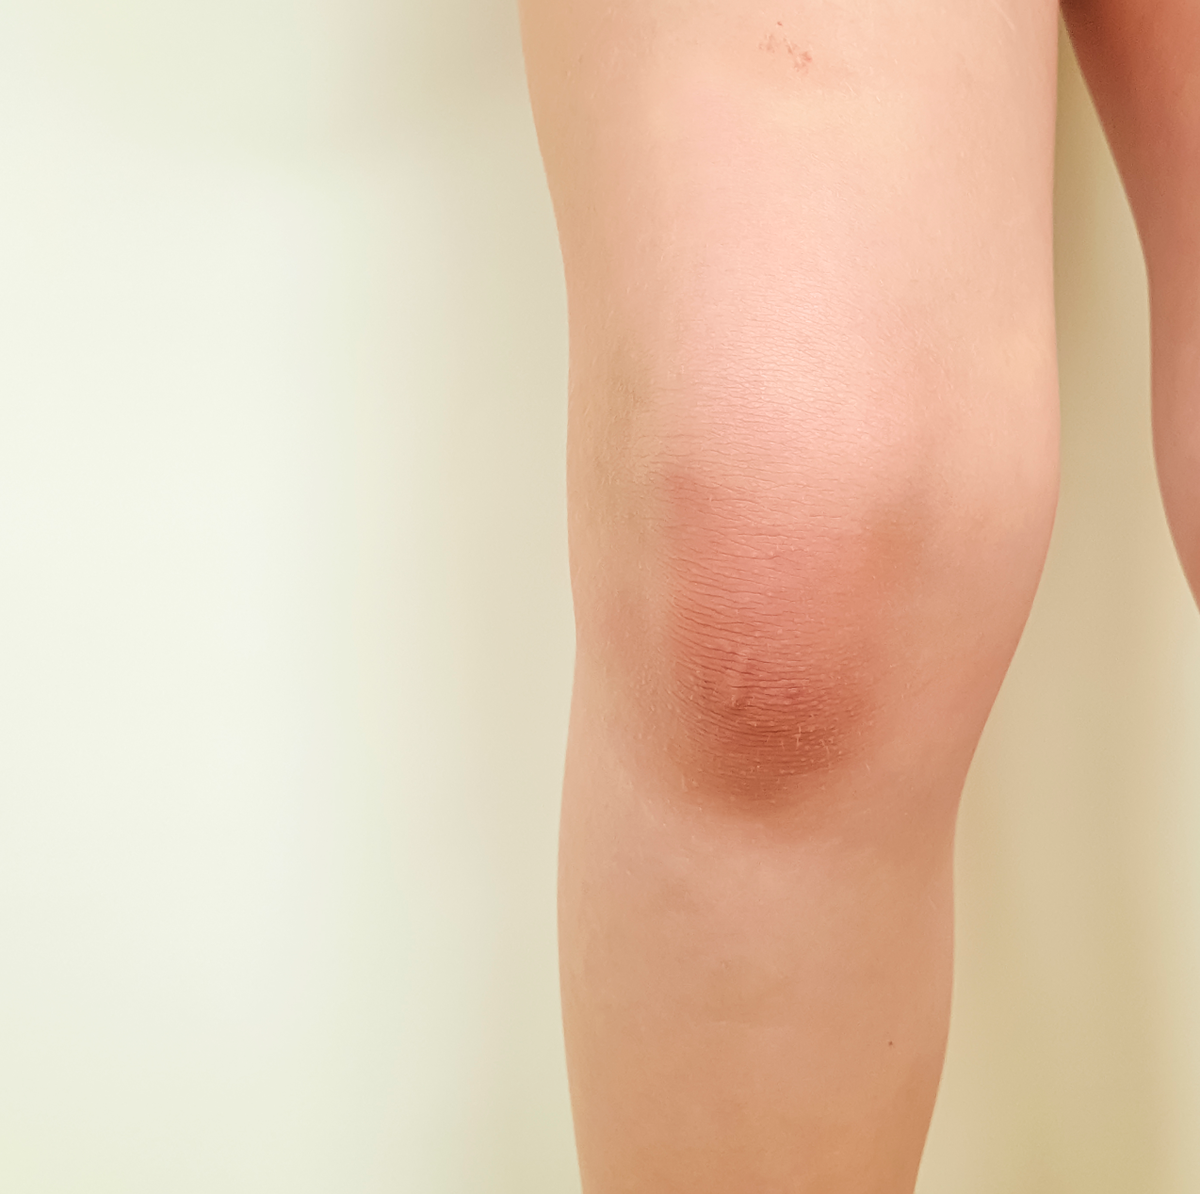 9 Swollen Knees Causes, Say Doctors - Why Are My Knees Swollen?